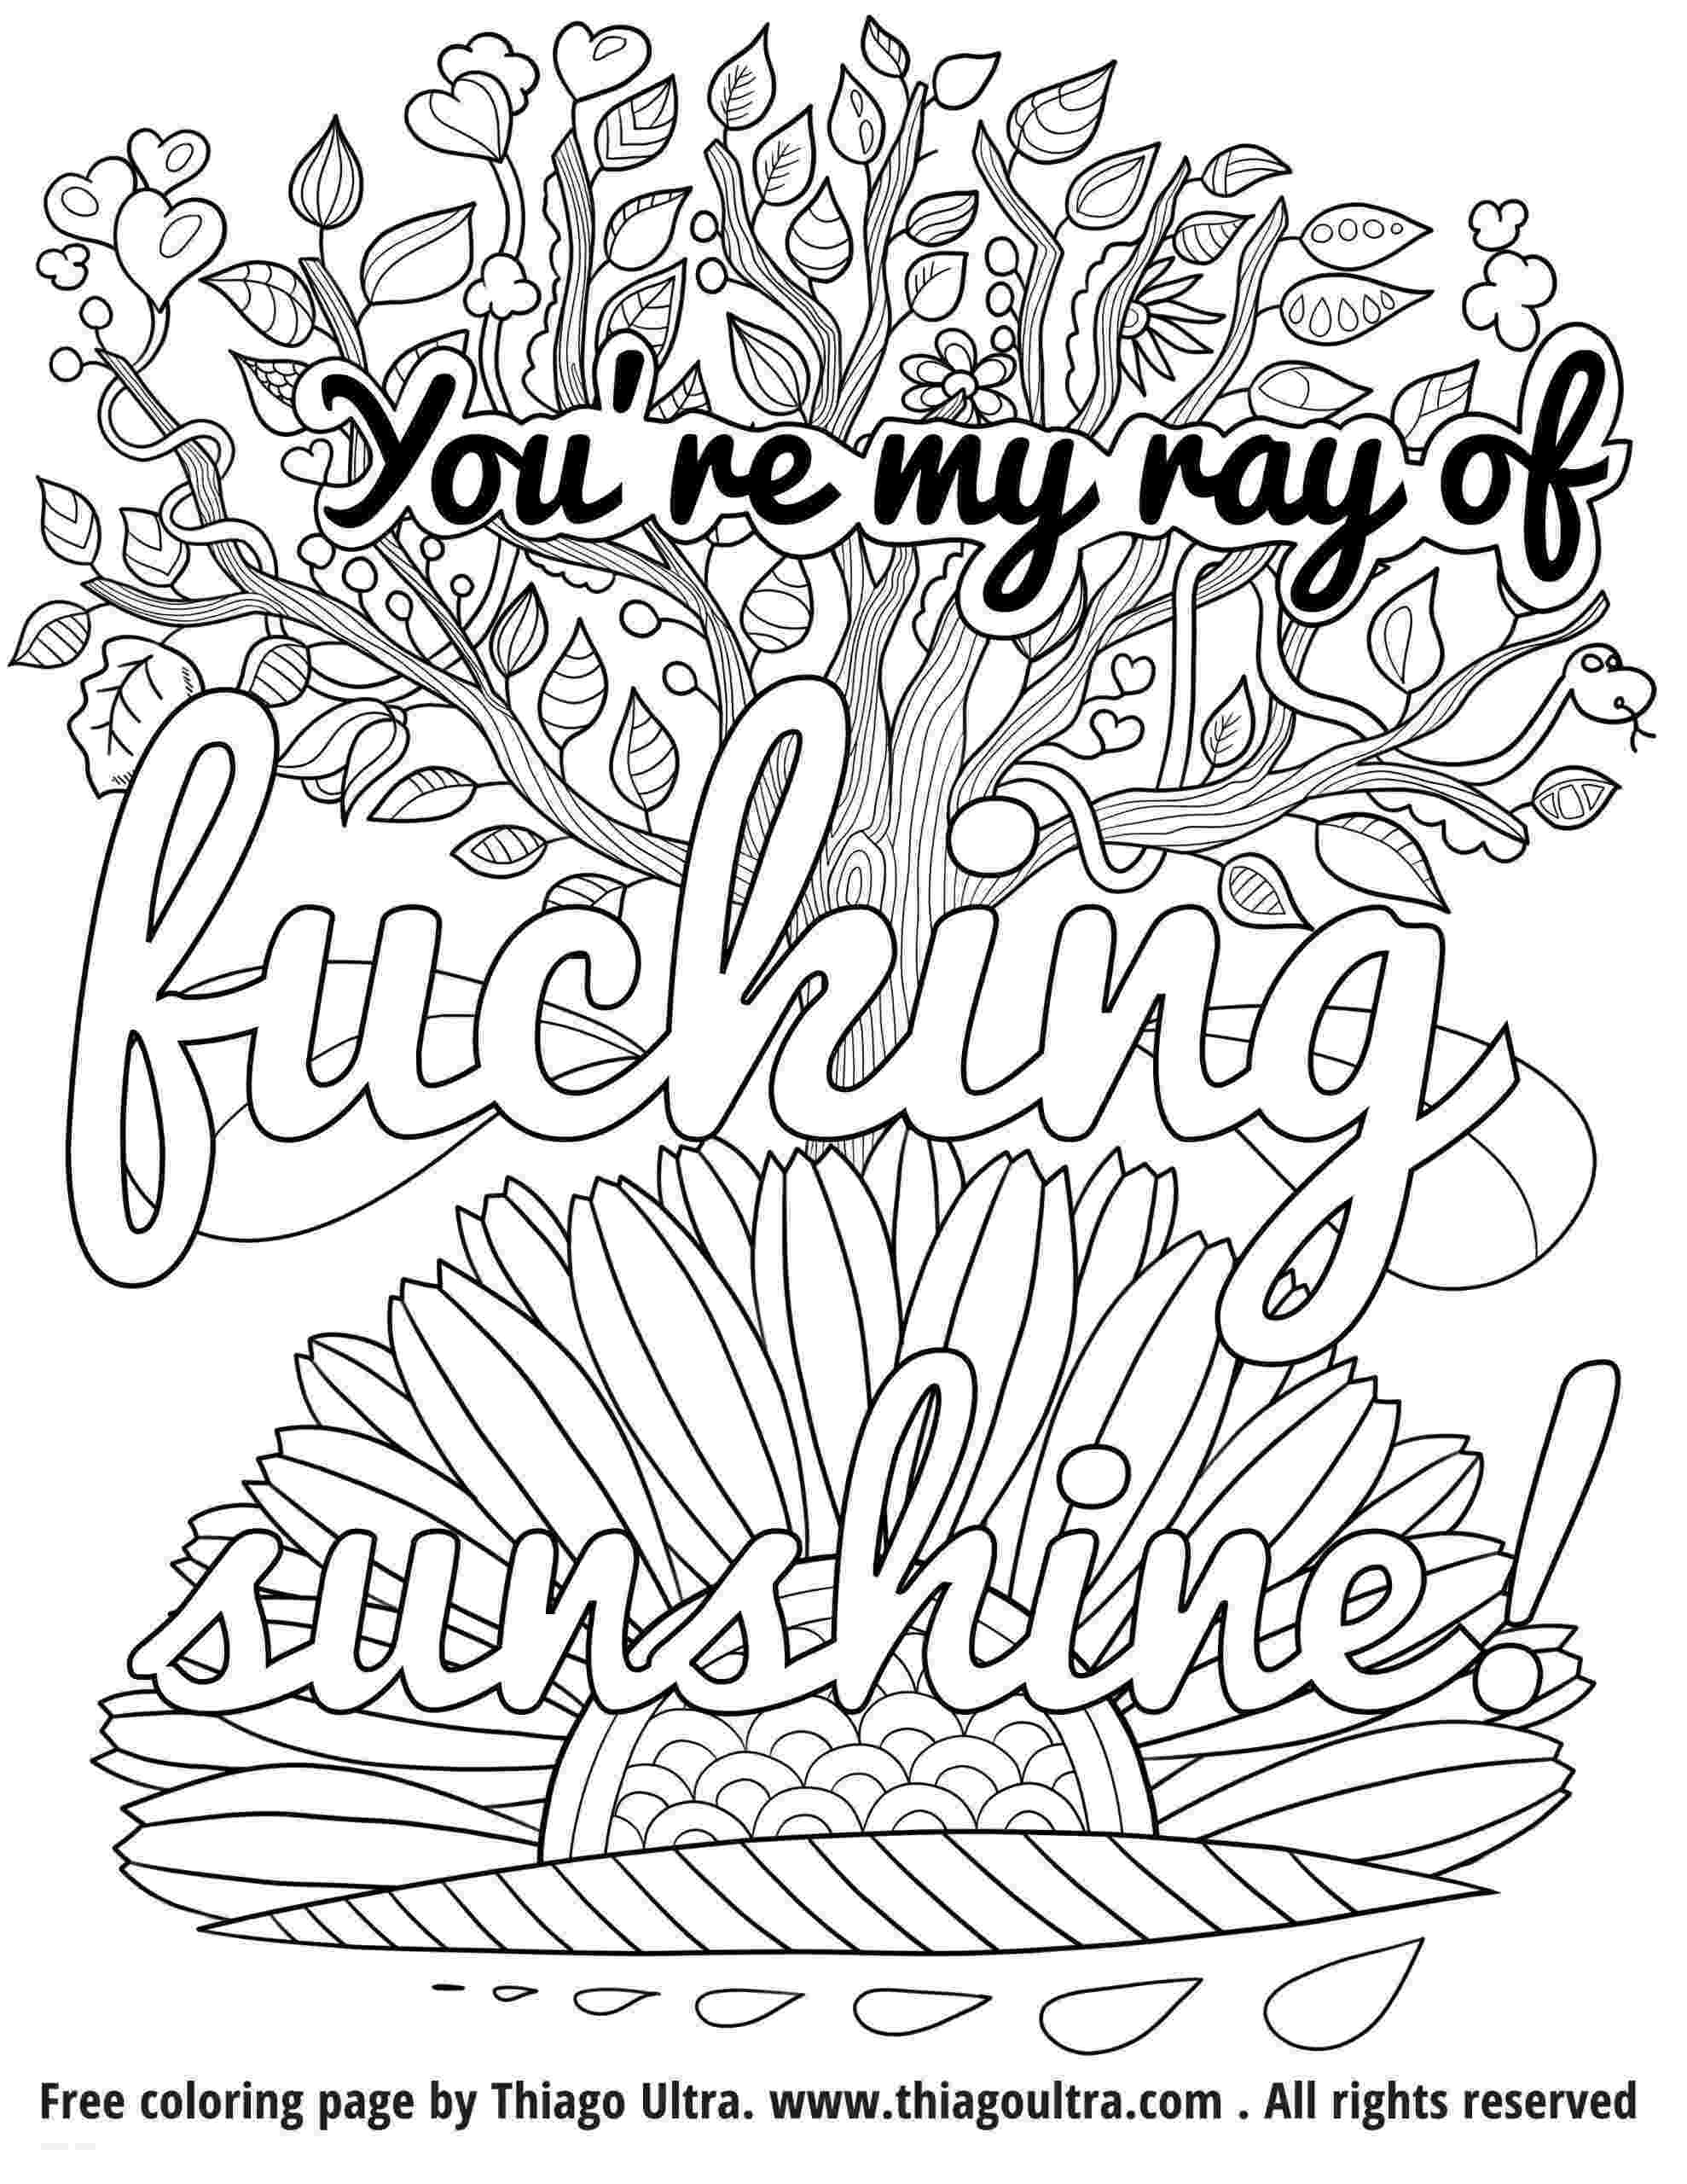 vybz kartel coloring book download hulk coloring pages coloring book for adults printable art download book kartel vybz coloring hulk 